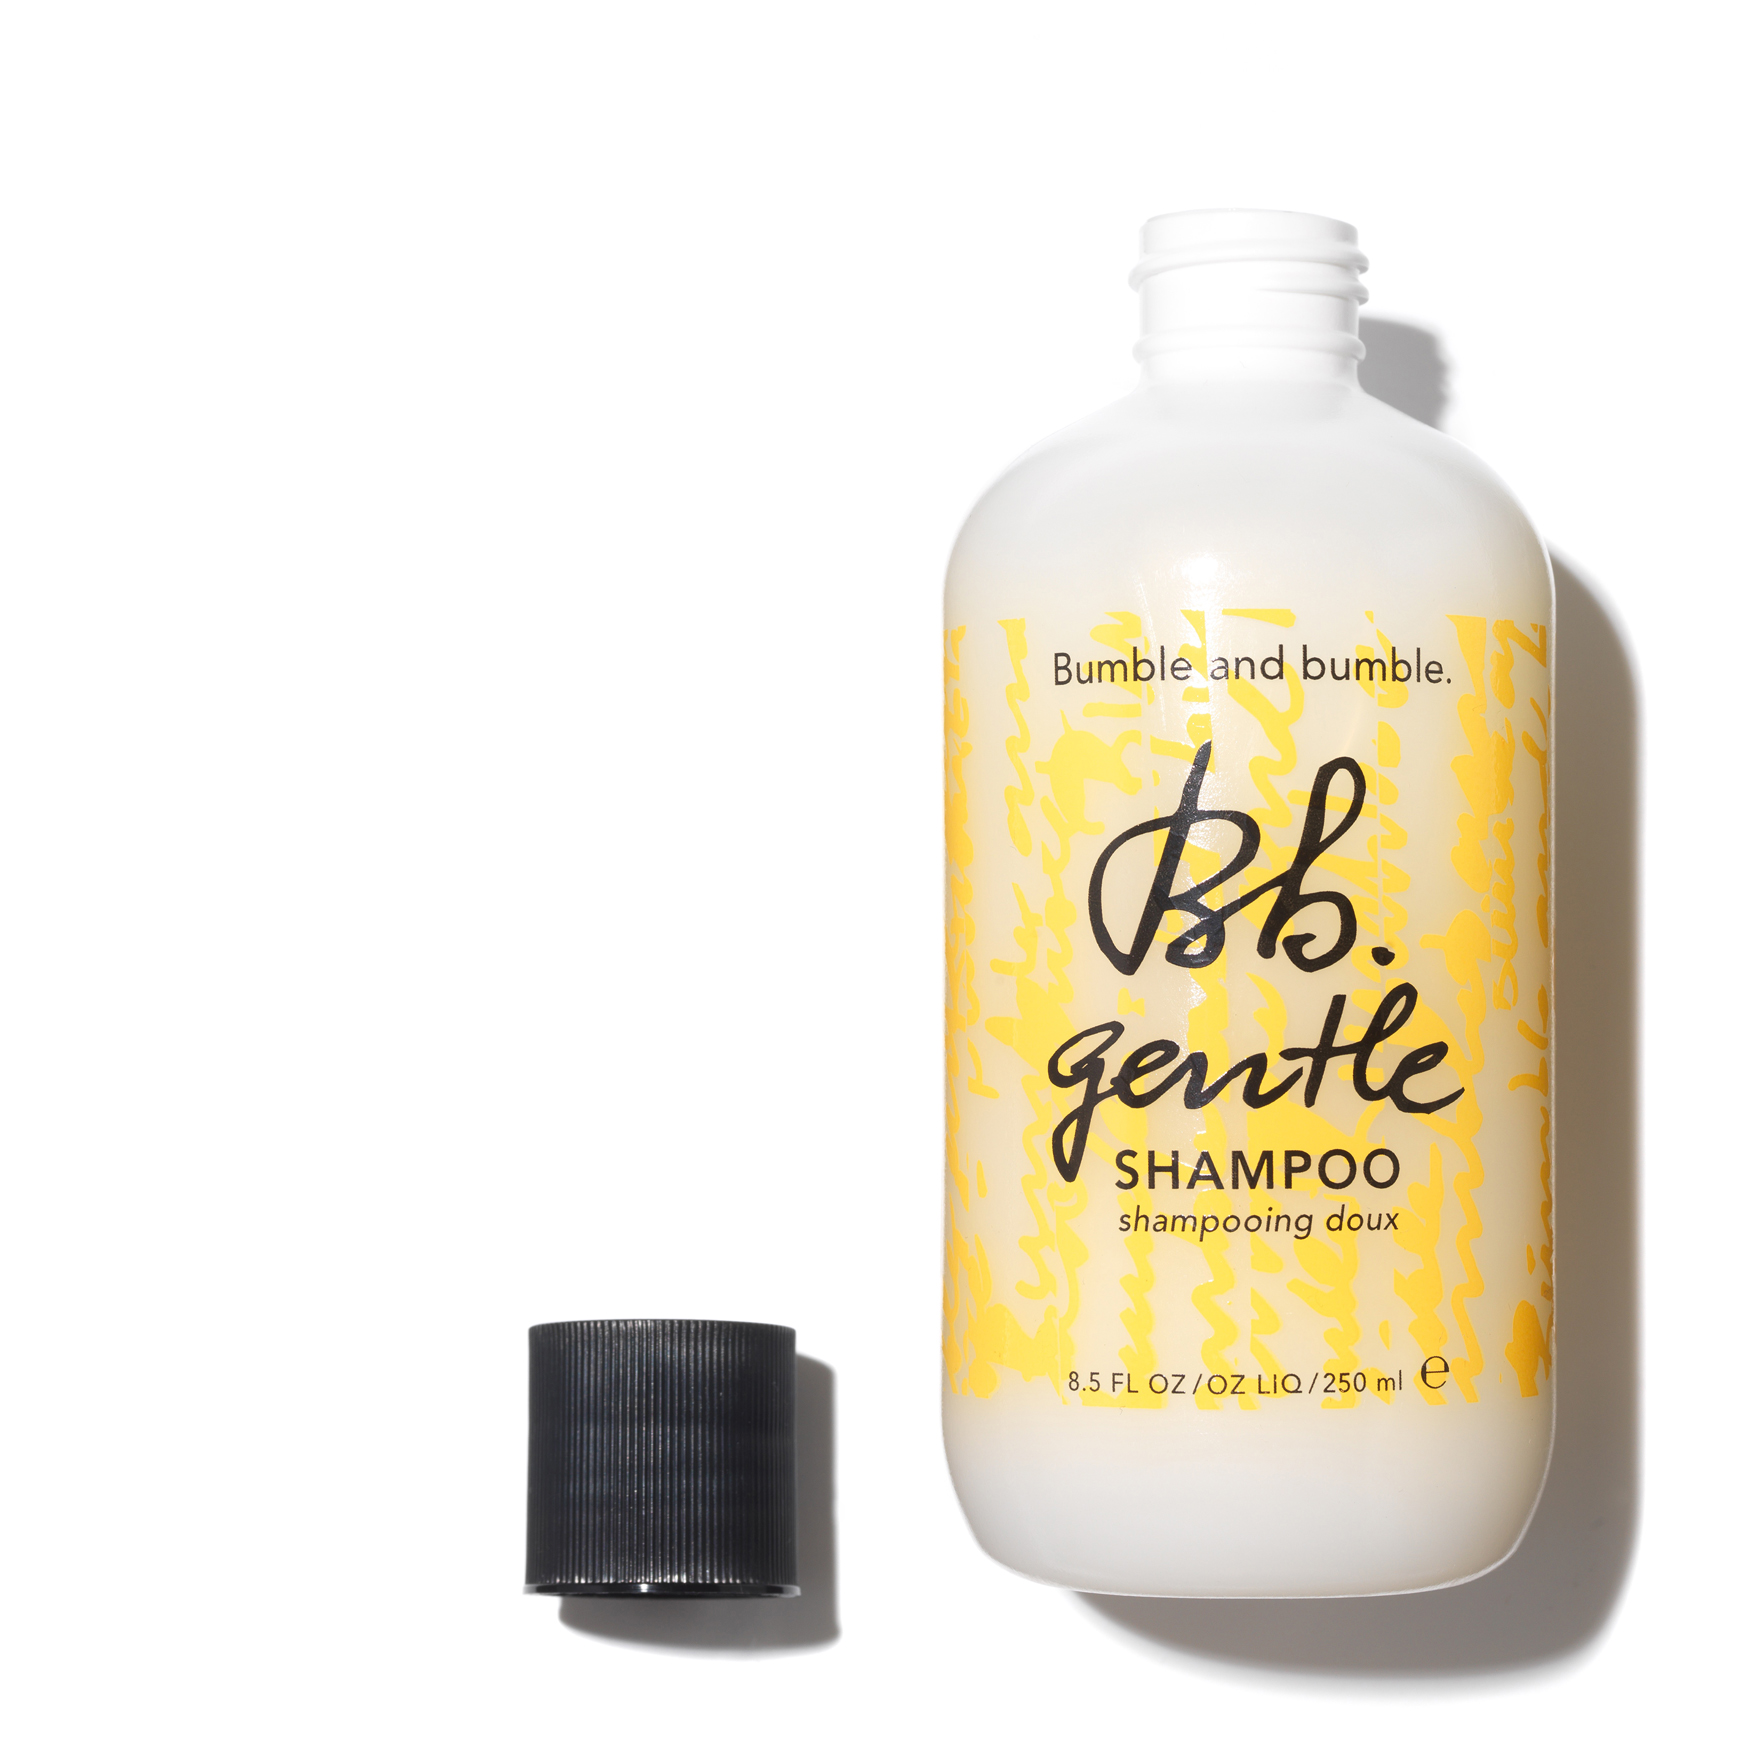 Gentle Shampoo - Bumble and bumble | Space NK